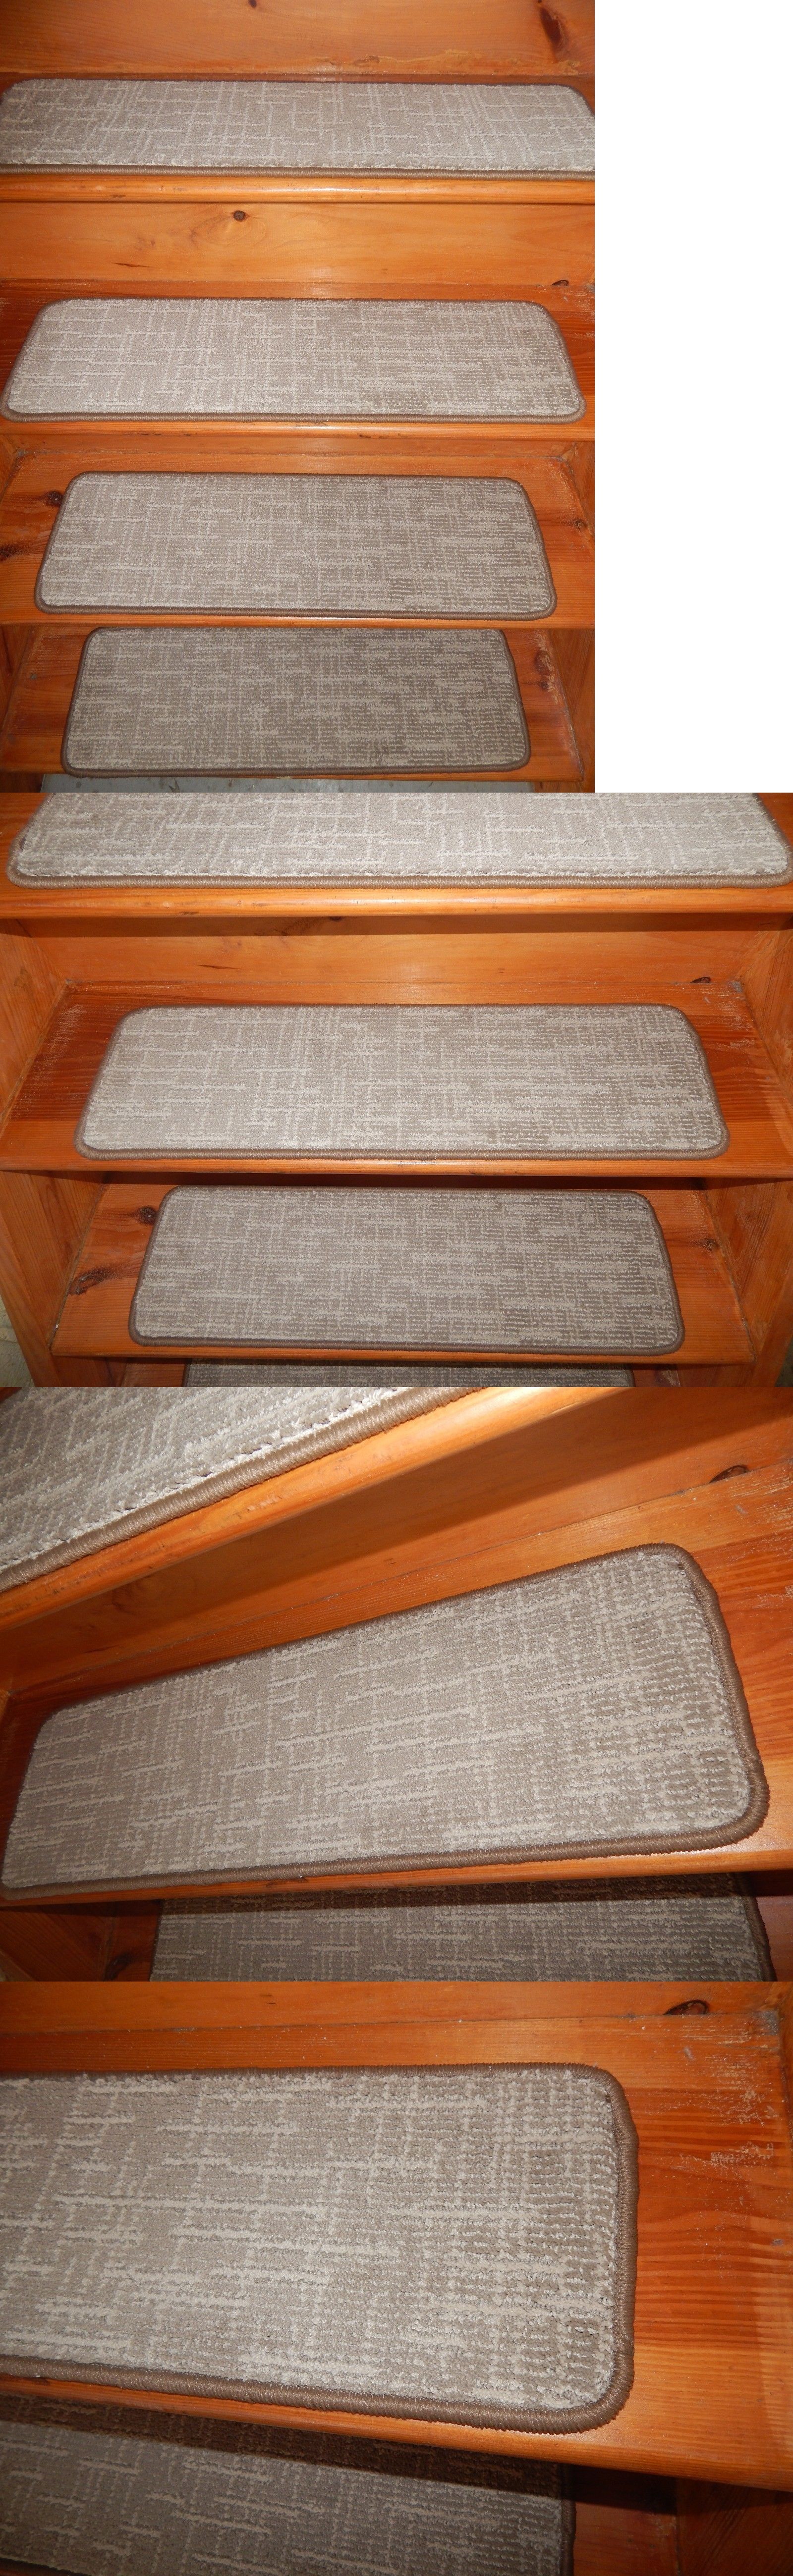 Stair Treads 175517 13 Step 9 X 30 Landing 30 X 27 Stair Treads With Regard To Basket Weave Washable Indoor Stair Tread Rugs (View 7 of 15)